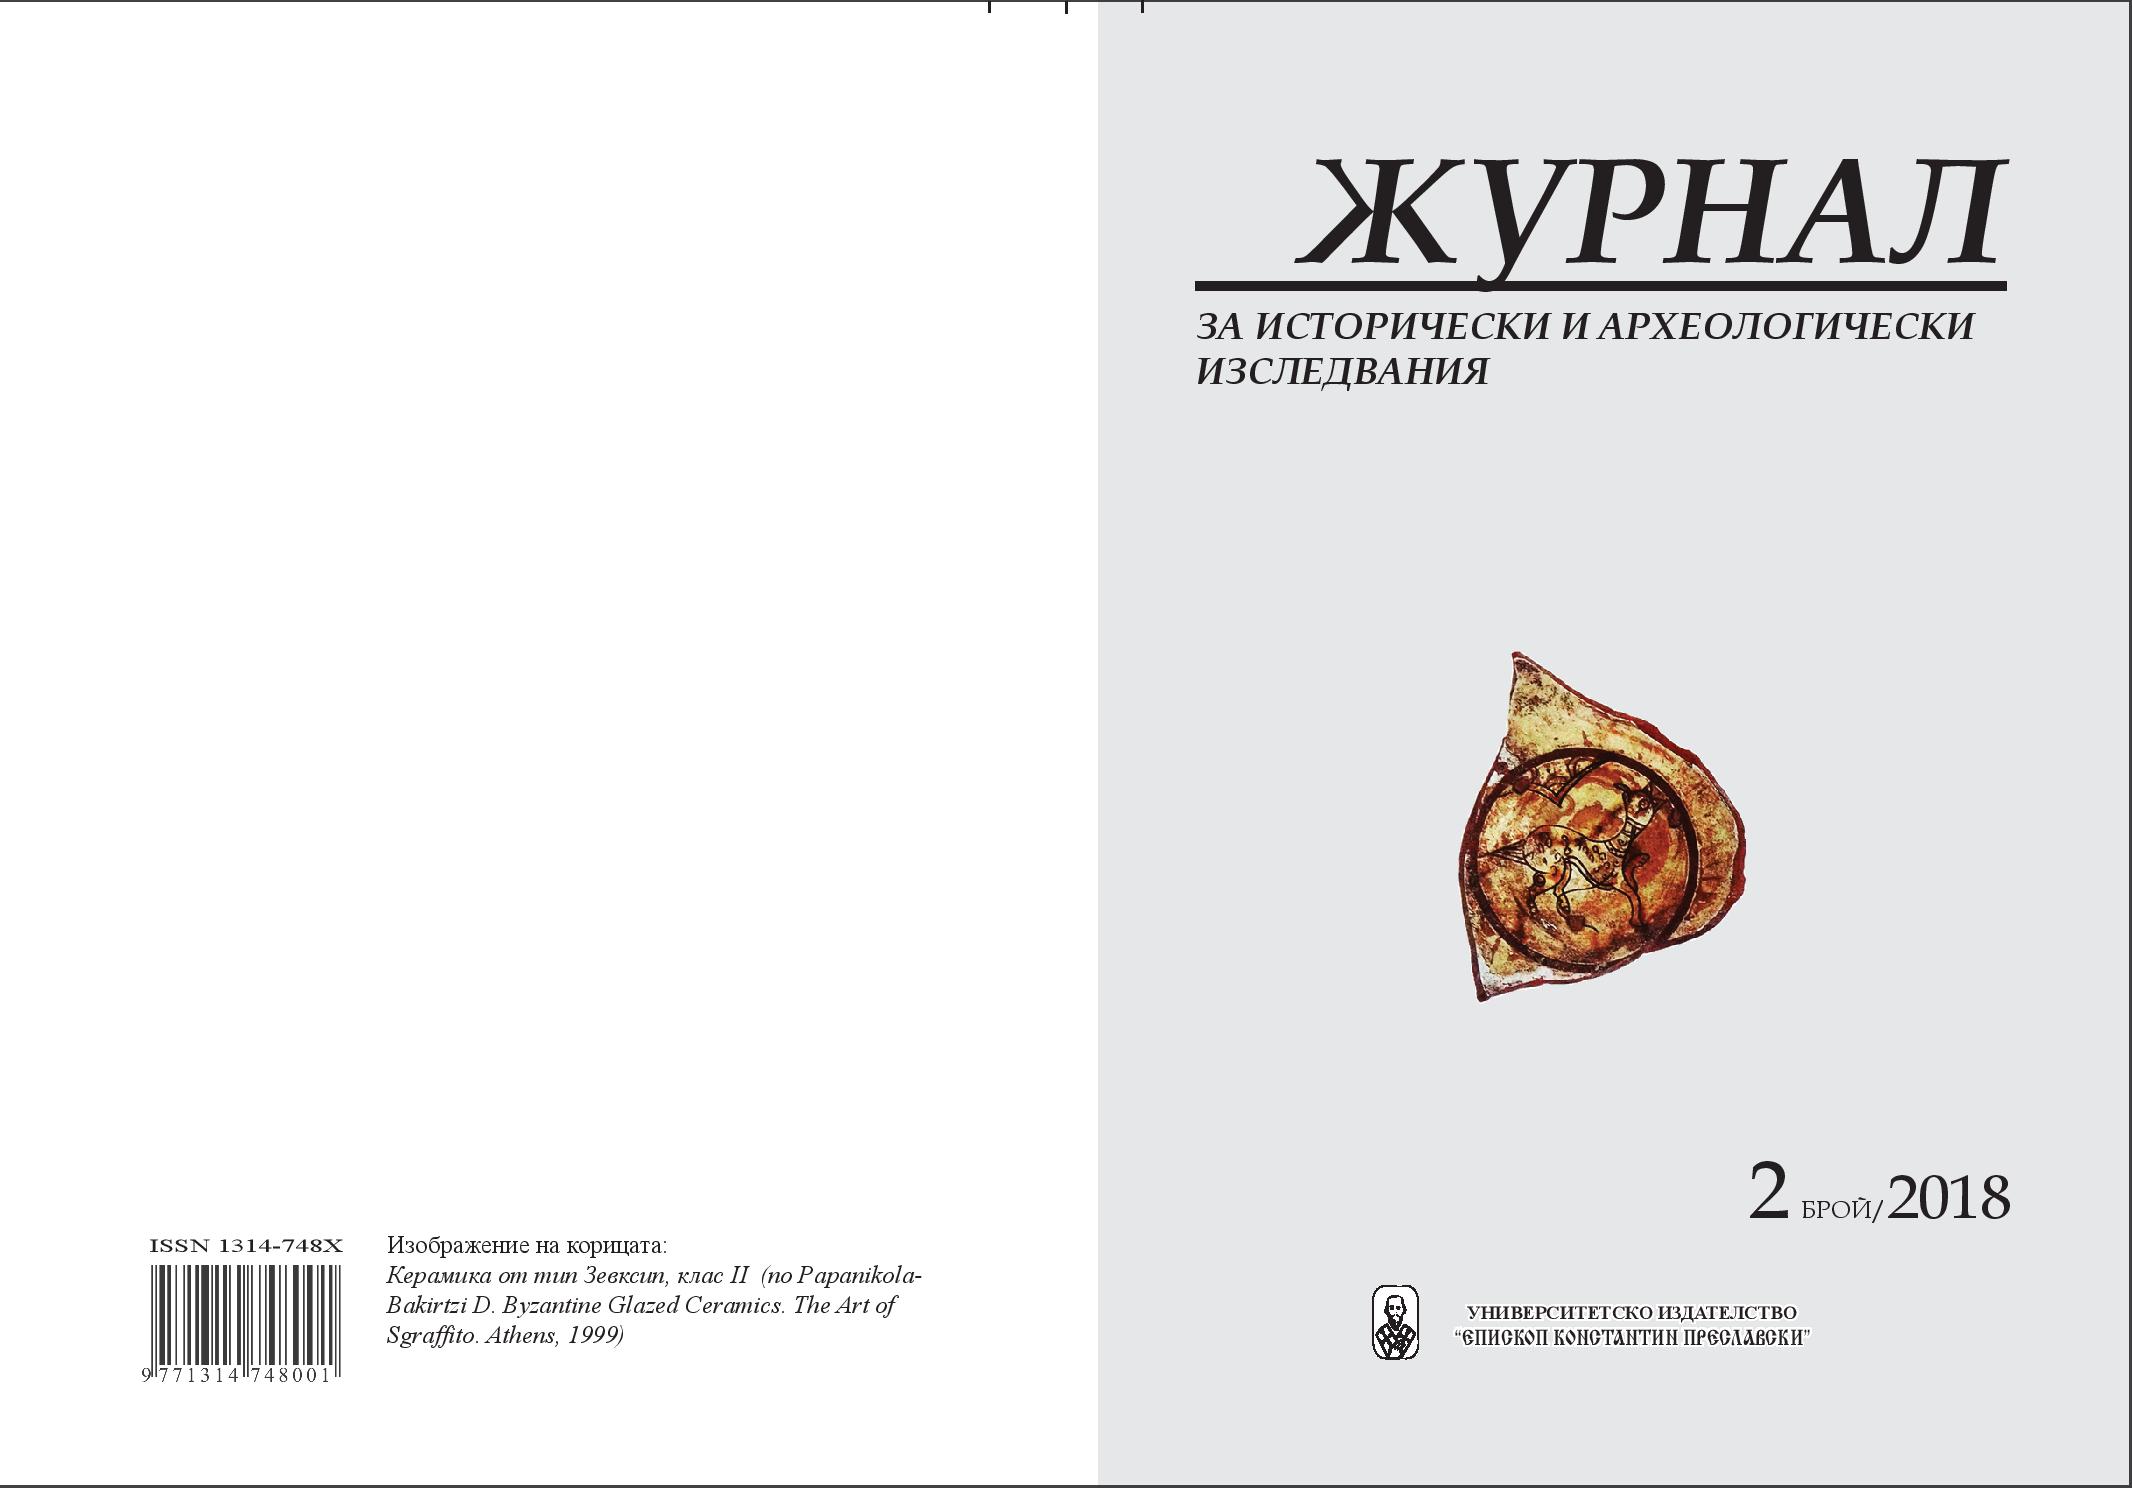 About the question of Medieval Sgraffito ceramic Zeuxippus found in Bulgaria Cover Image